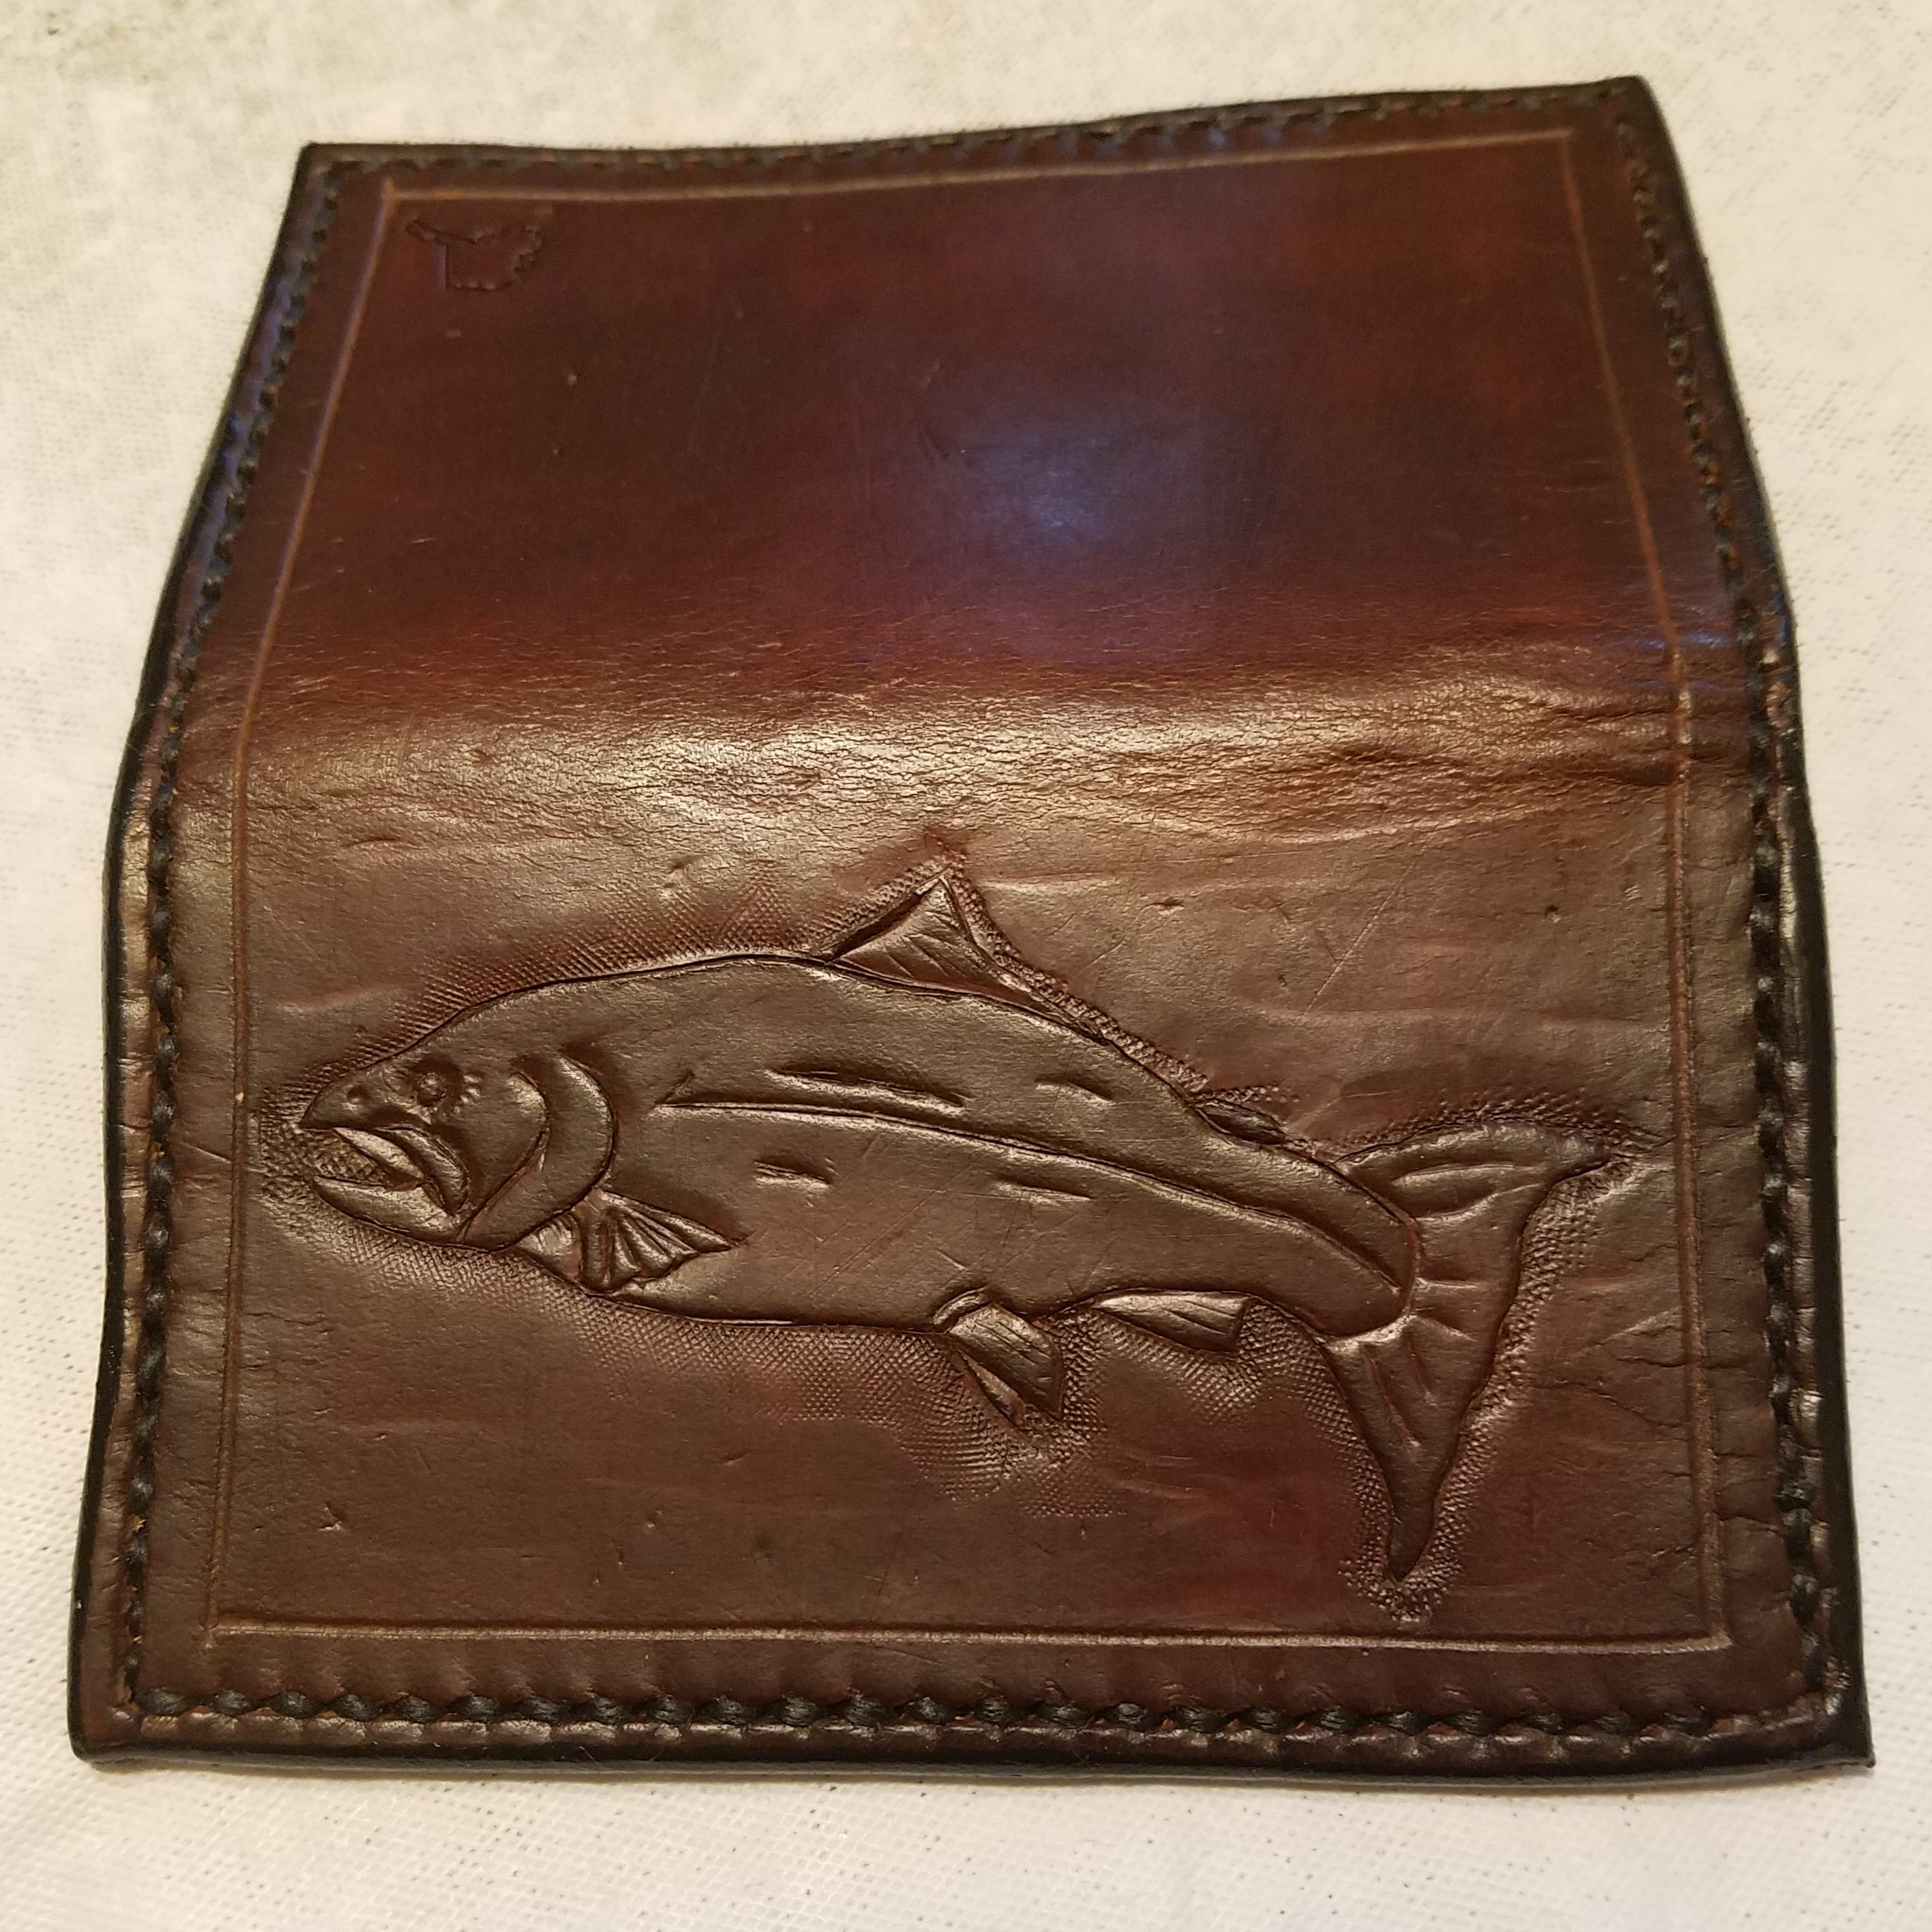 Minimalist 2 pocket wallet, hand tooled and stitched,  $65.00   SOLD